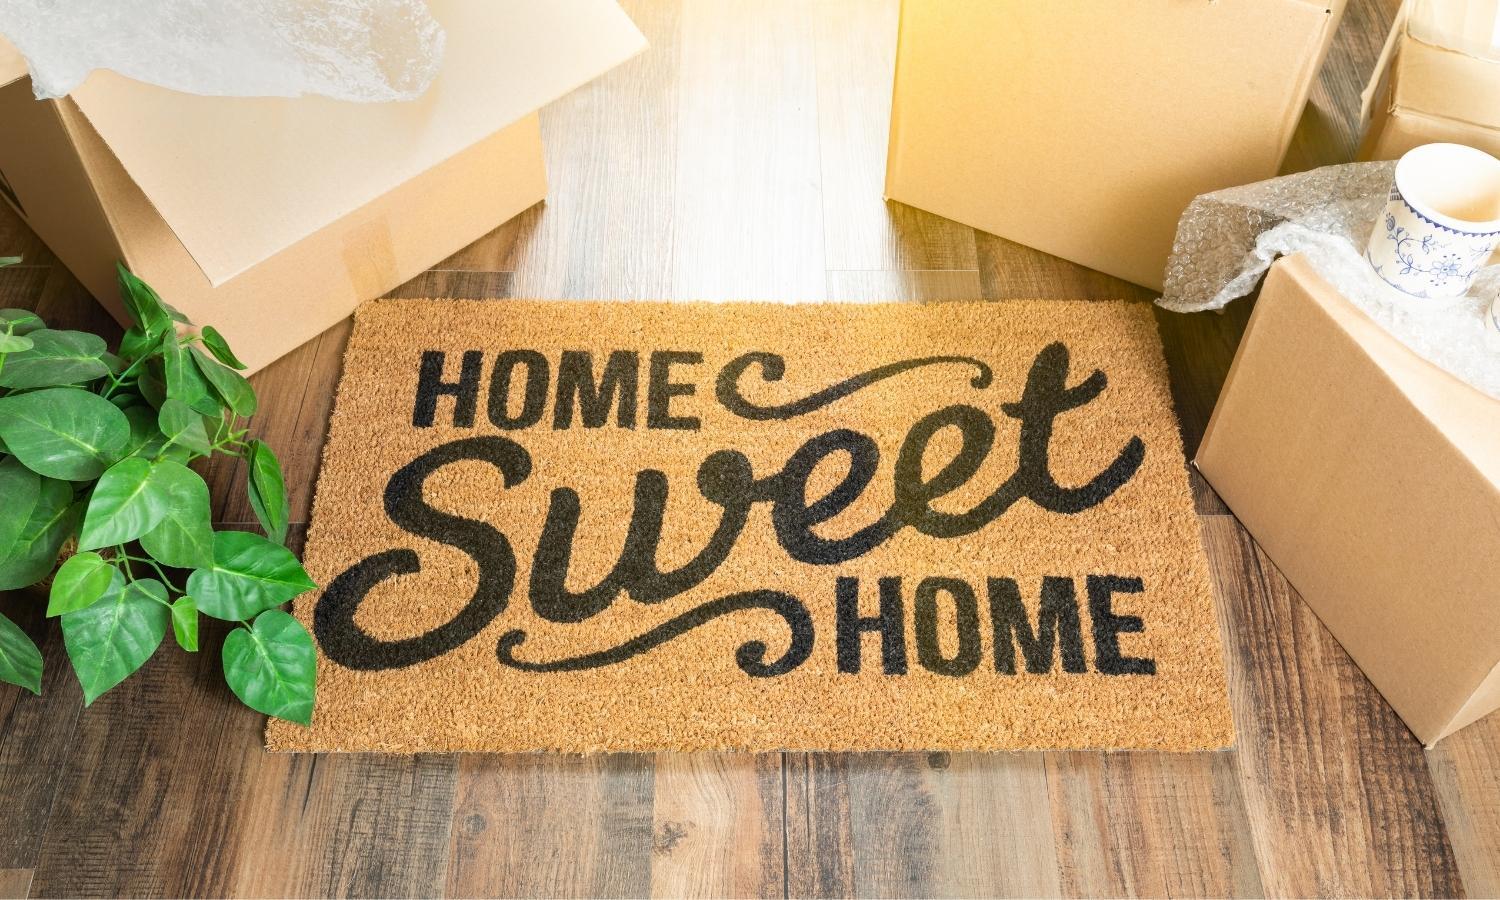 Home Sweet Home - Reliable Mortgage